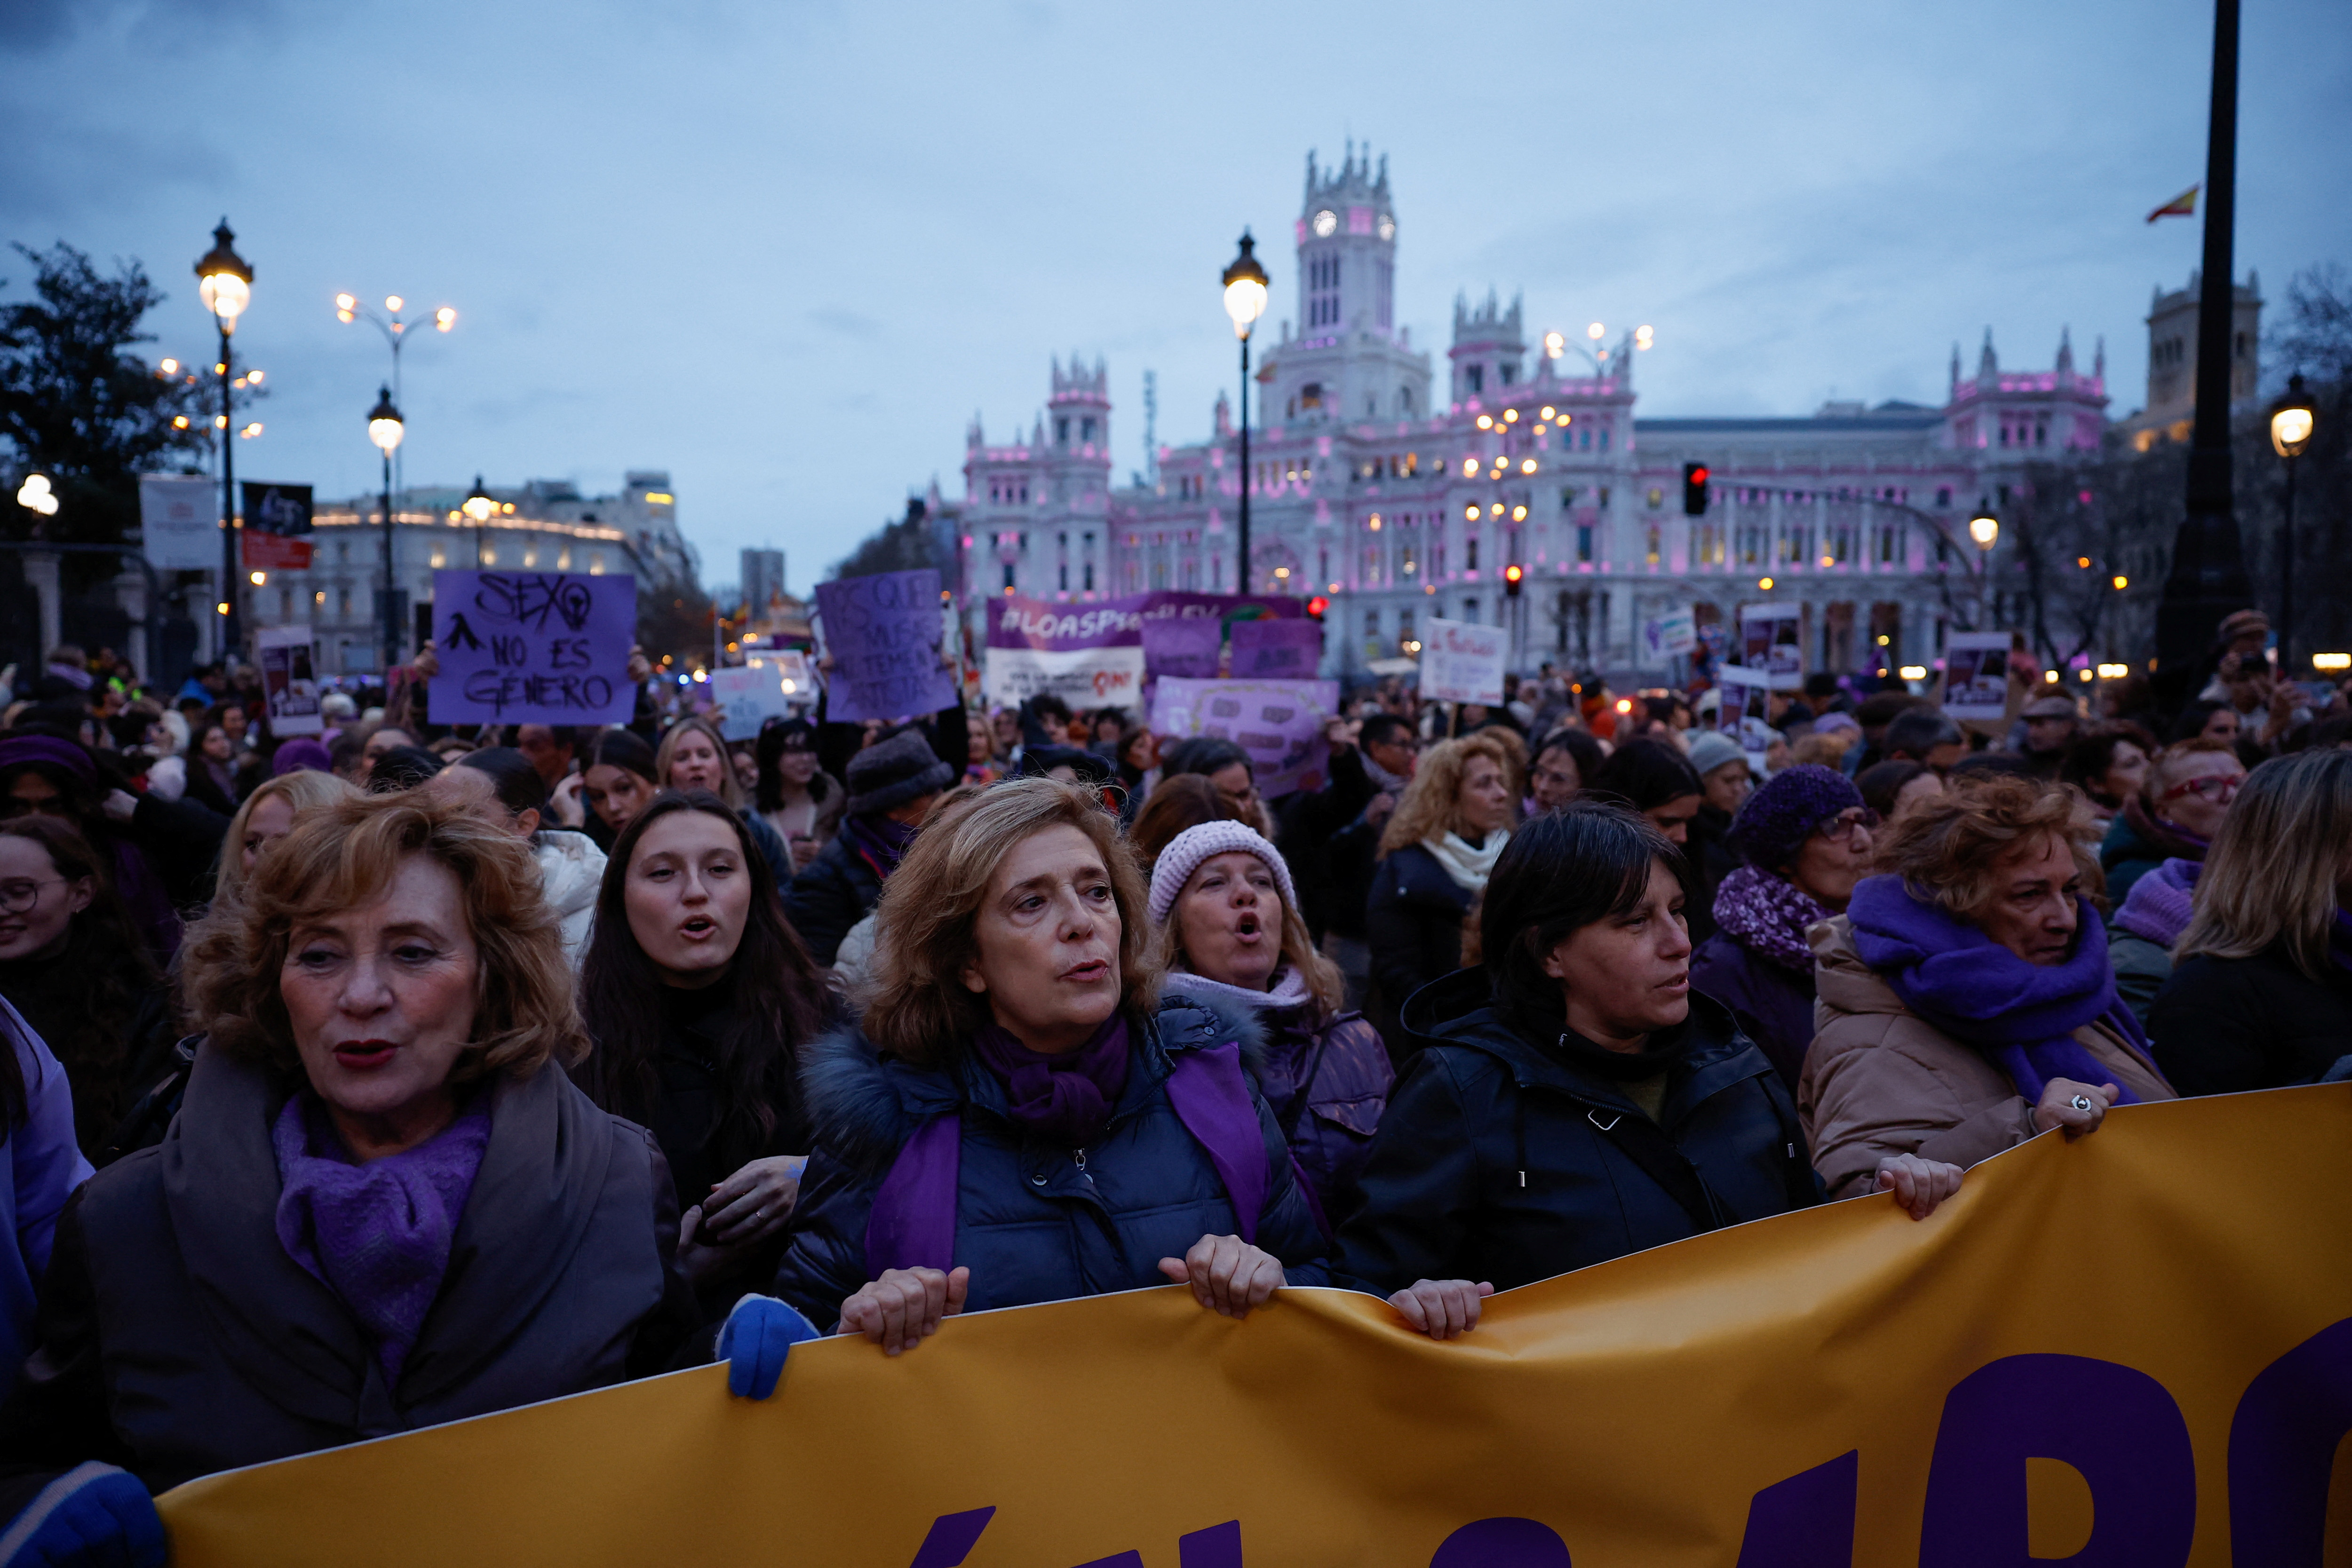 International Women's Day protest in Madrid